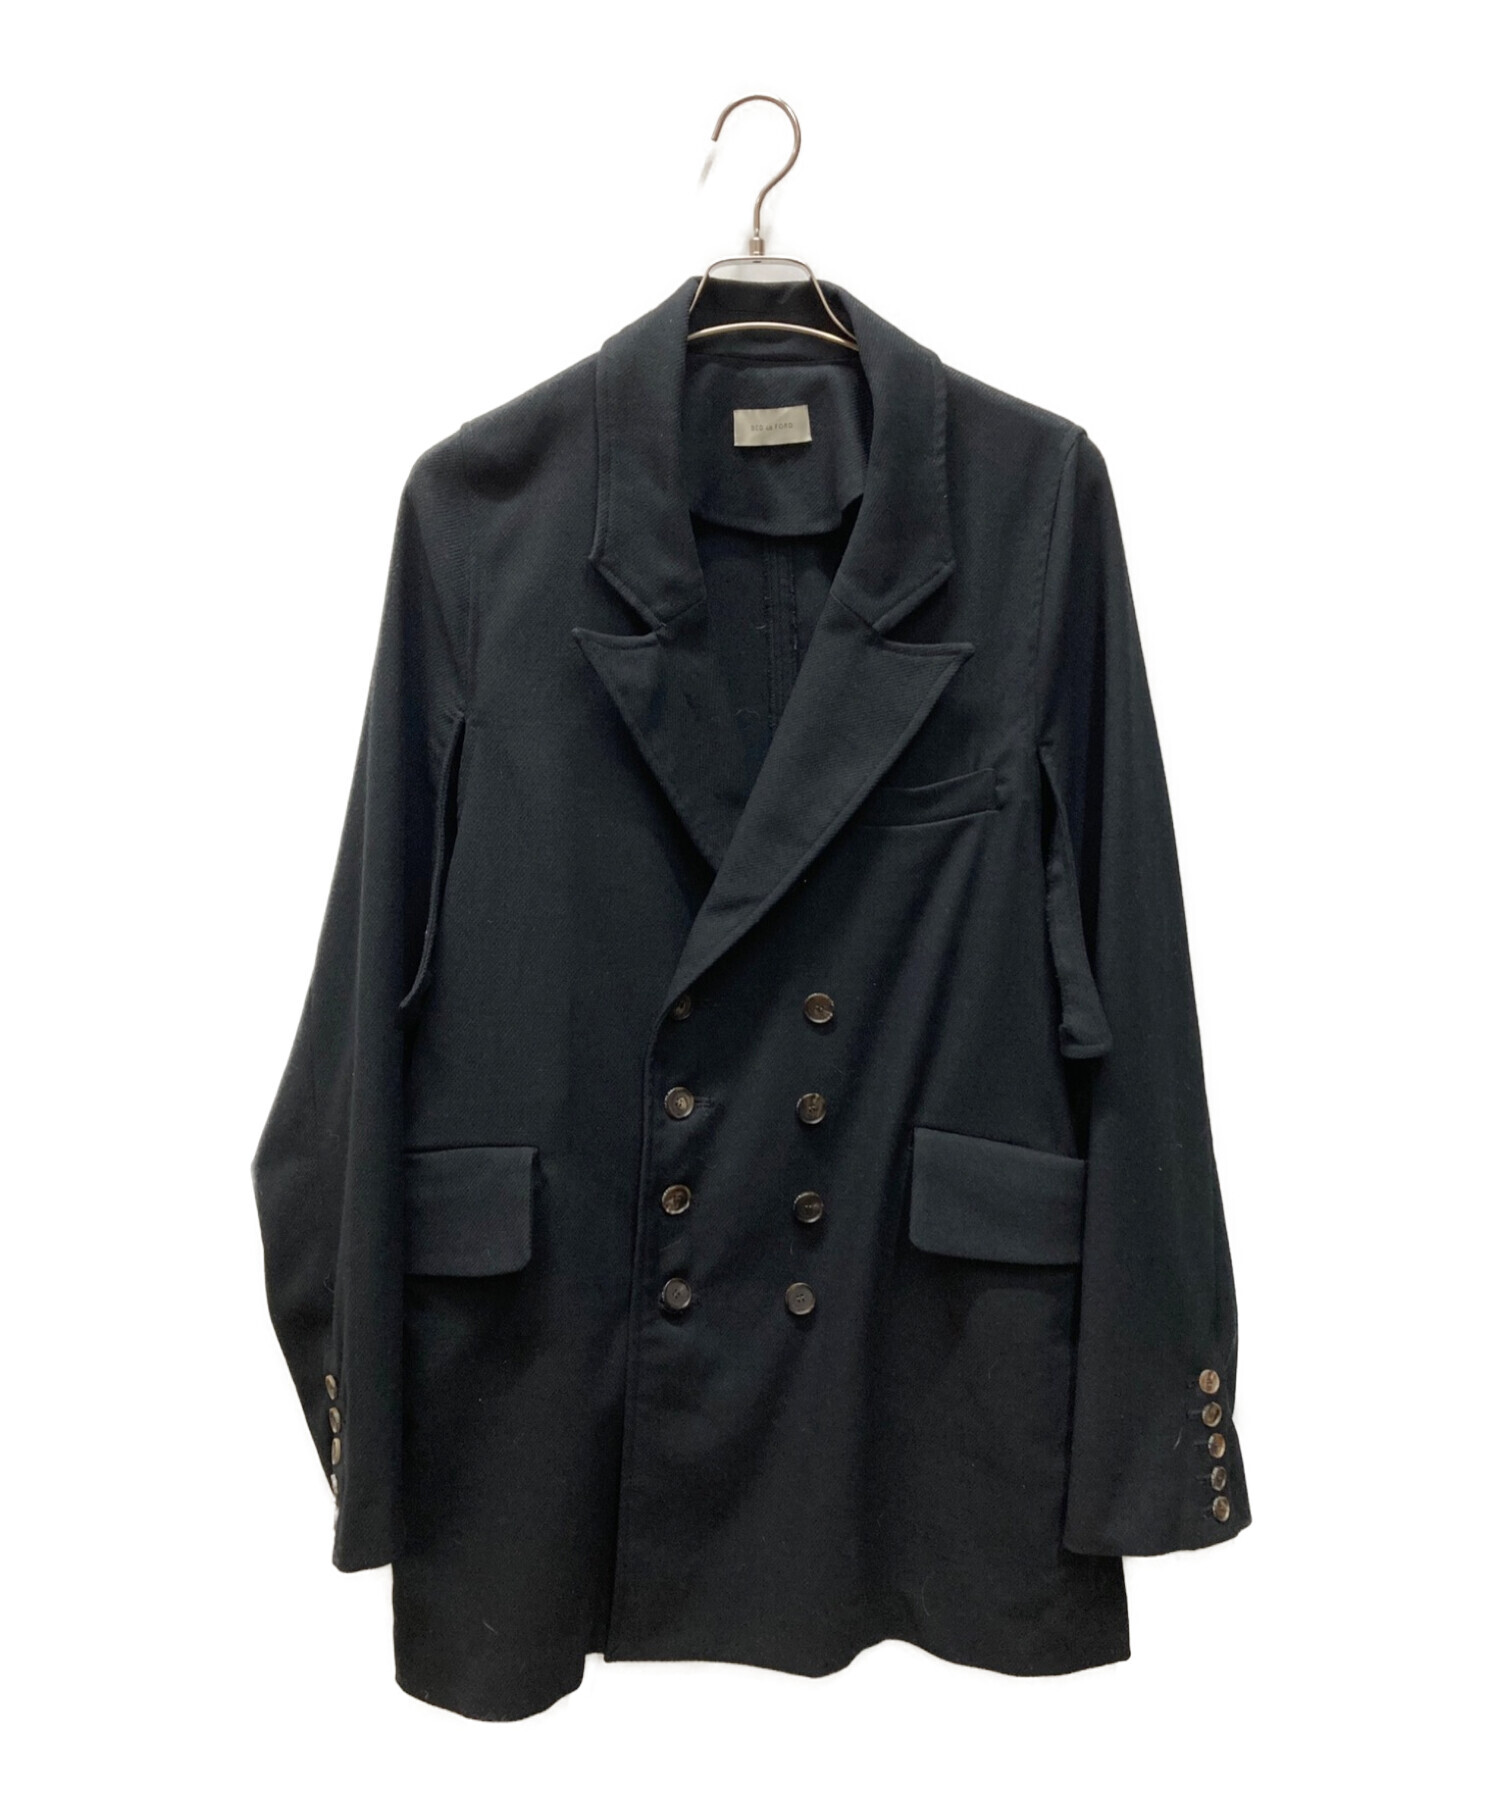 BED j.w. FORD – Military Coat (BLACK) - チェスターコート